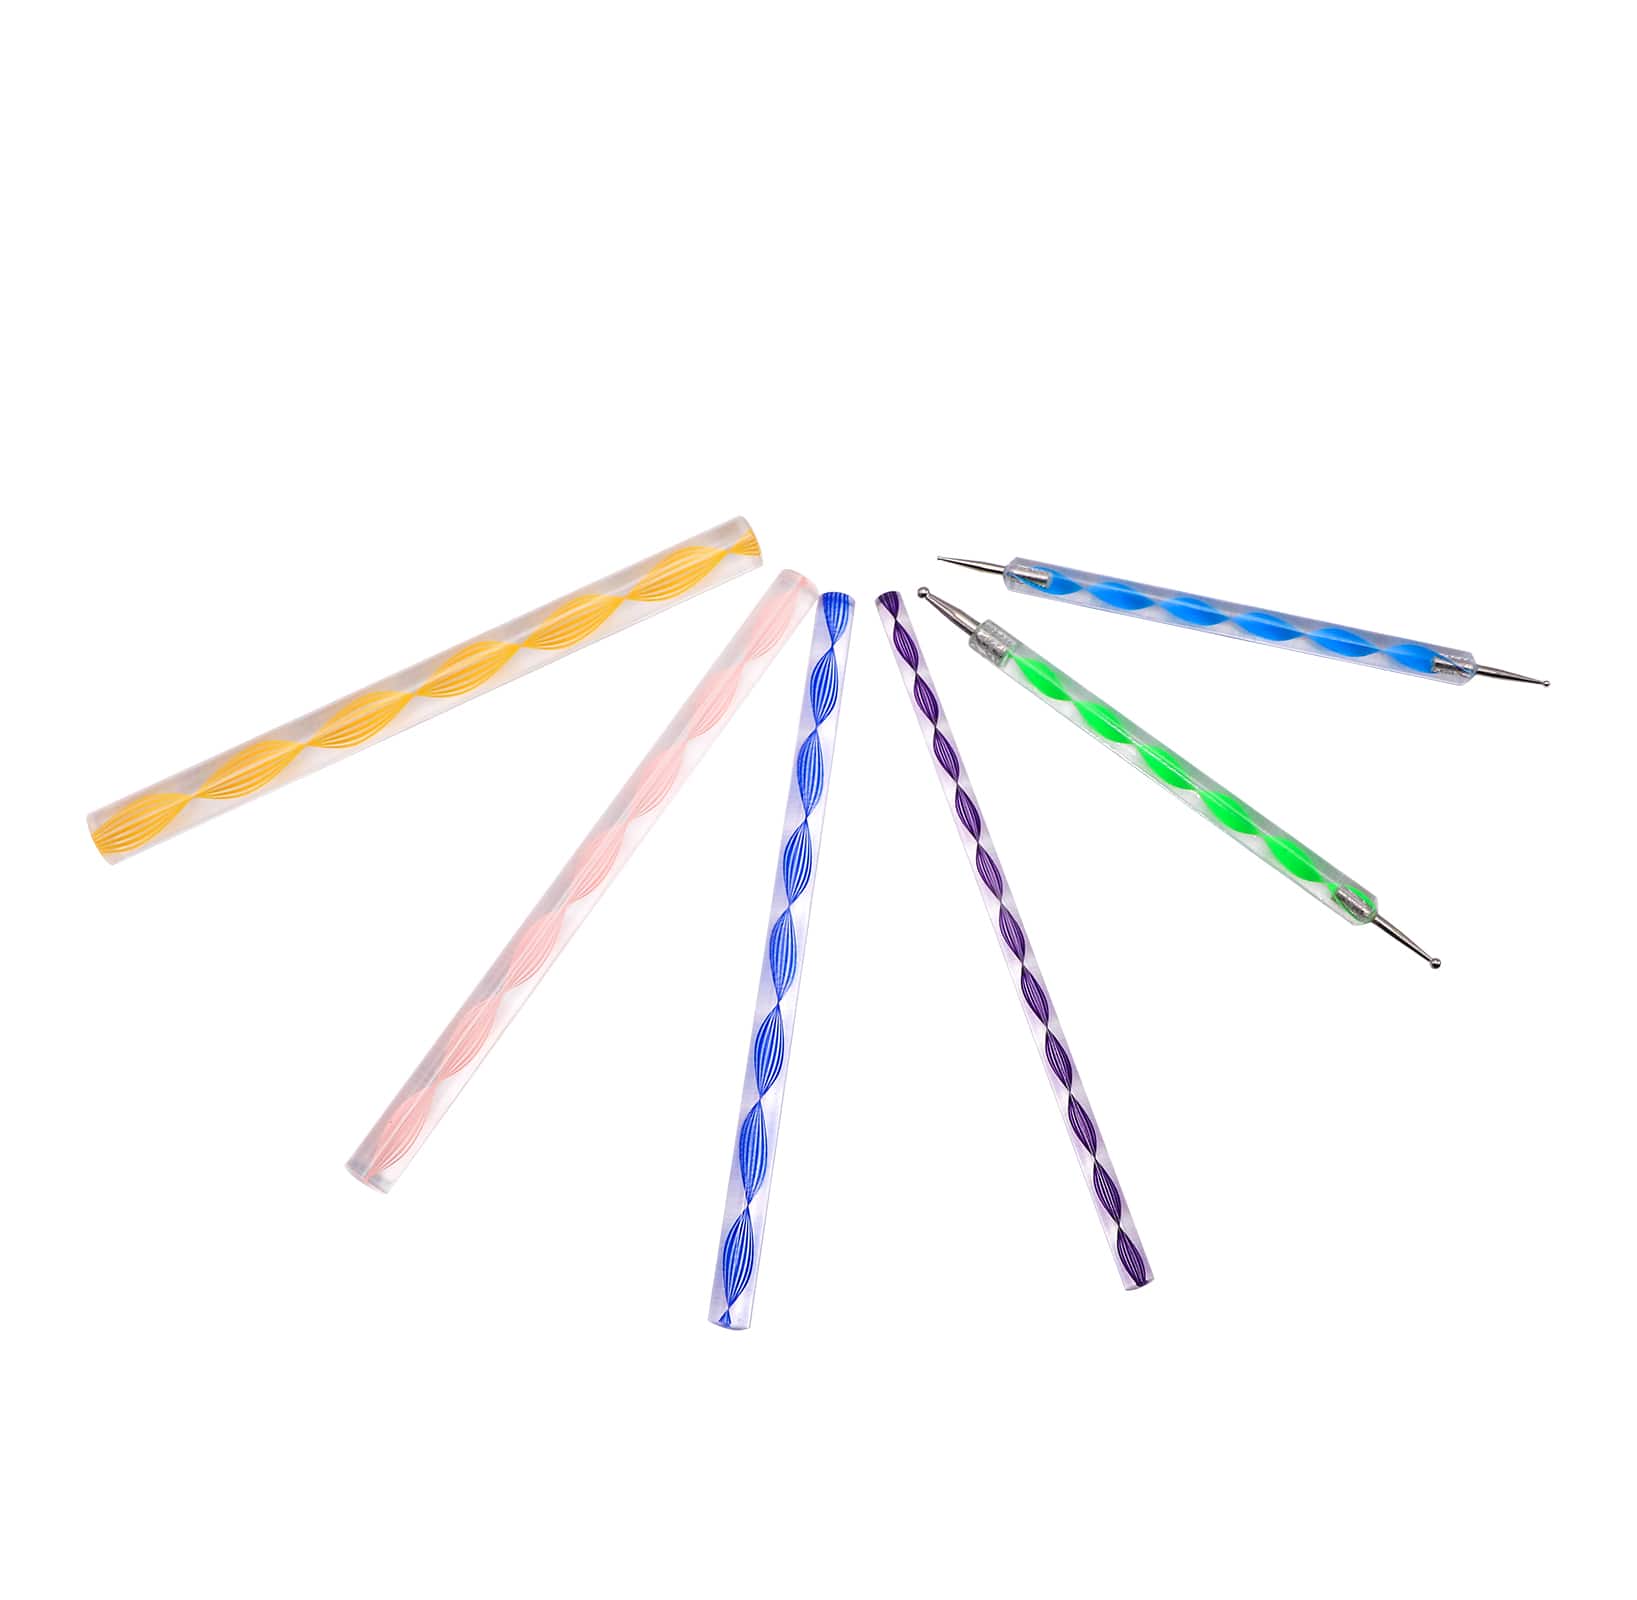 12 Pack: Mandala Dotting Tool Set with Colorful Handles by Craft Smart®